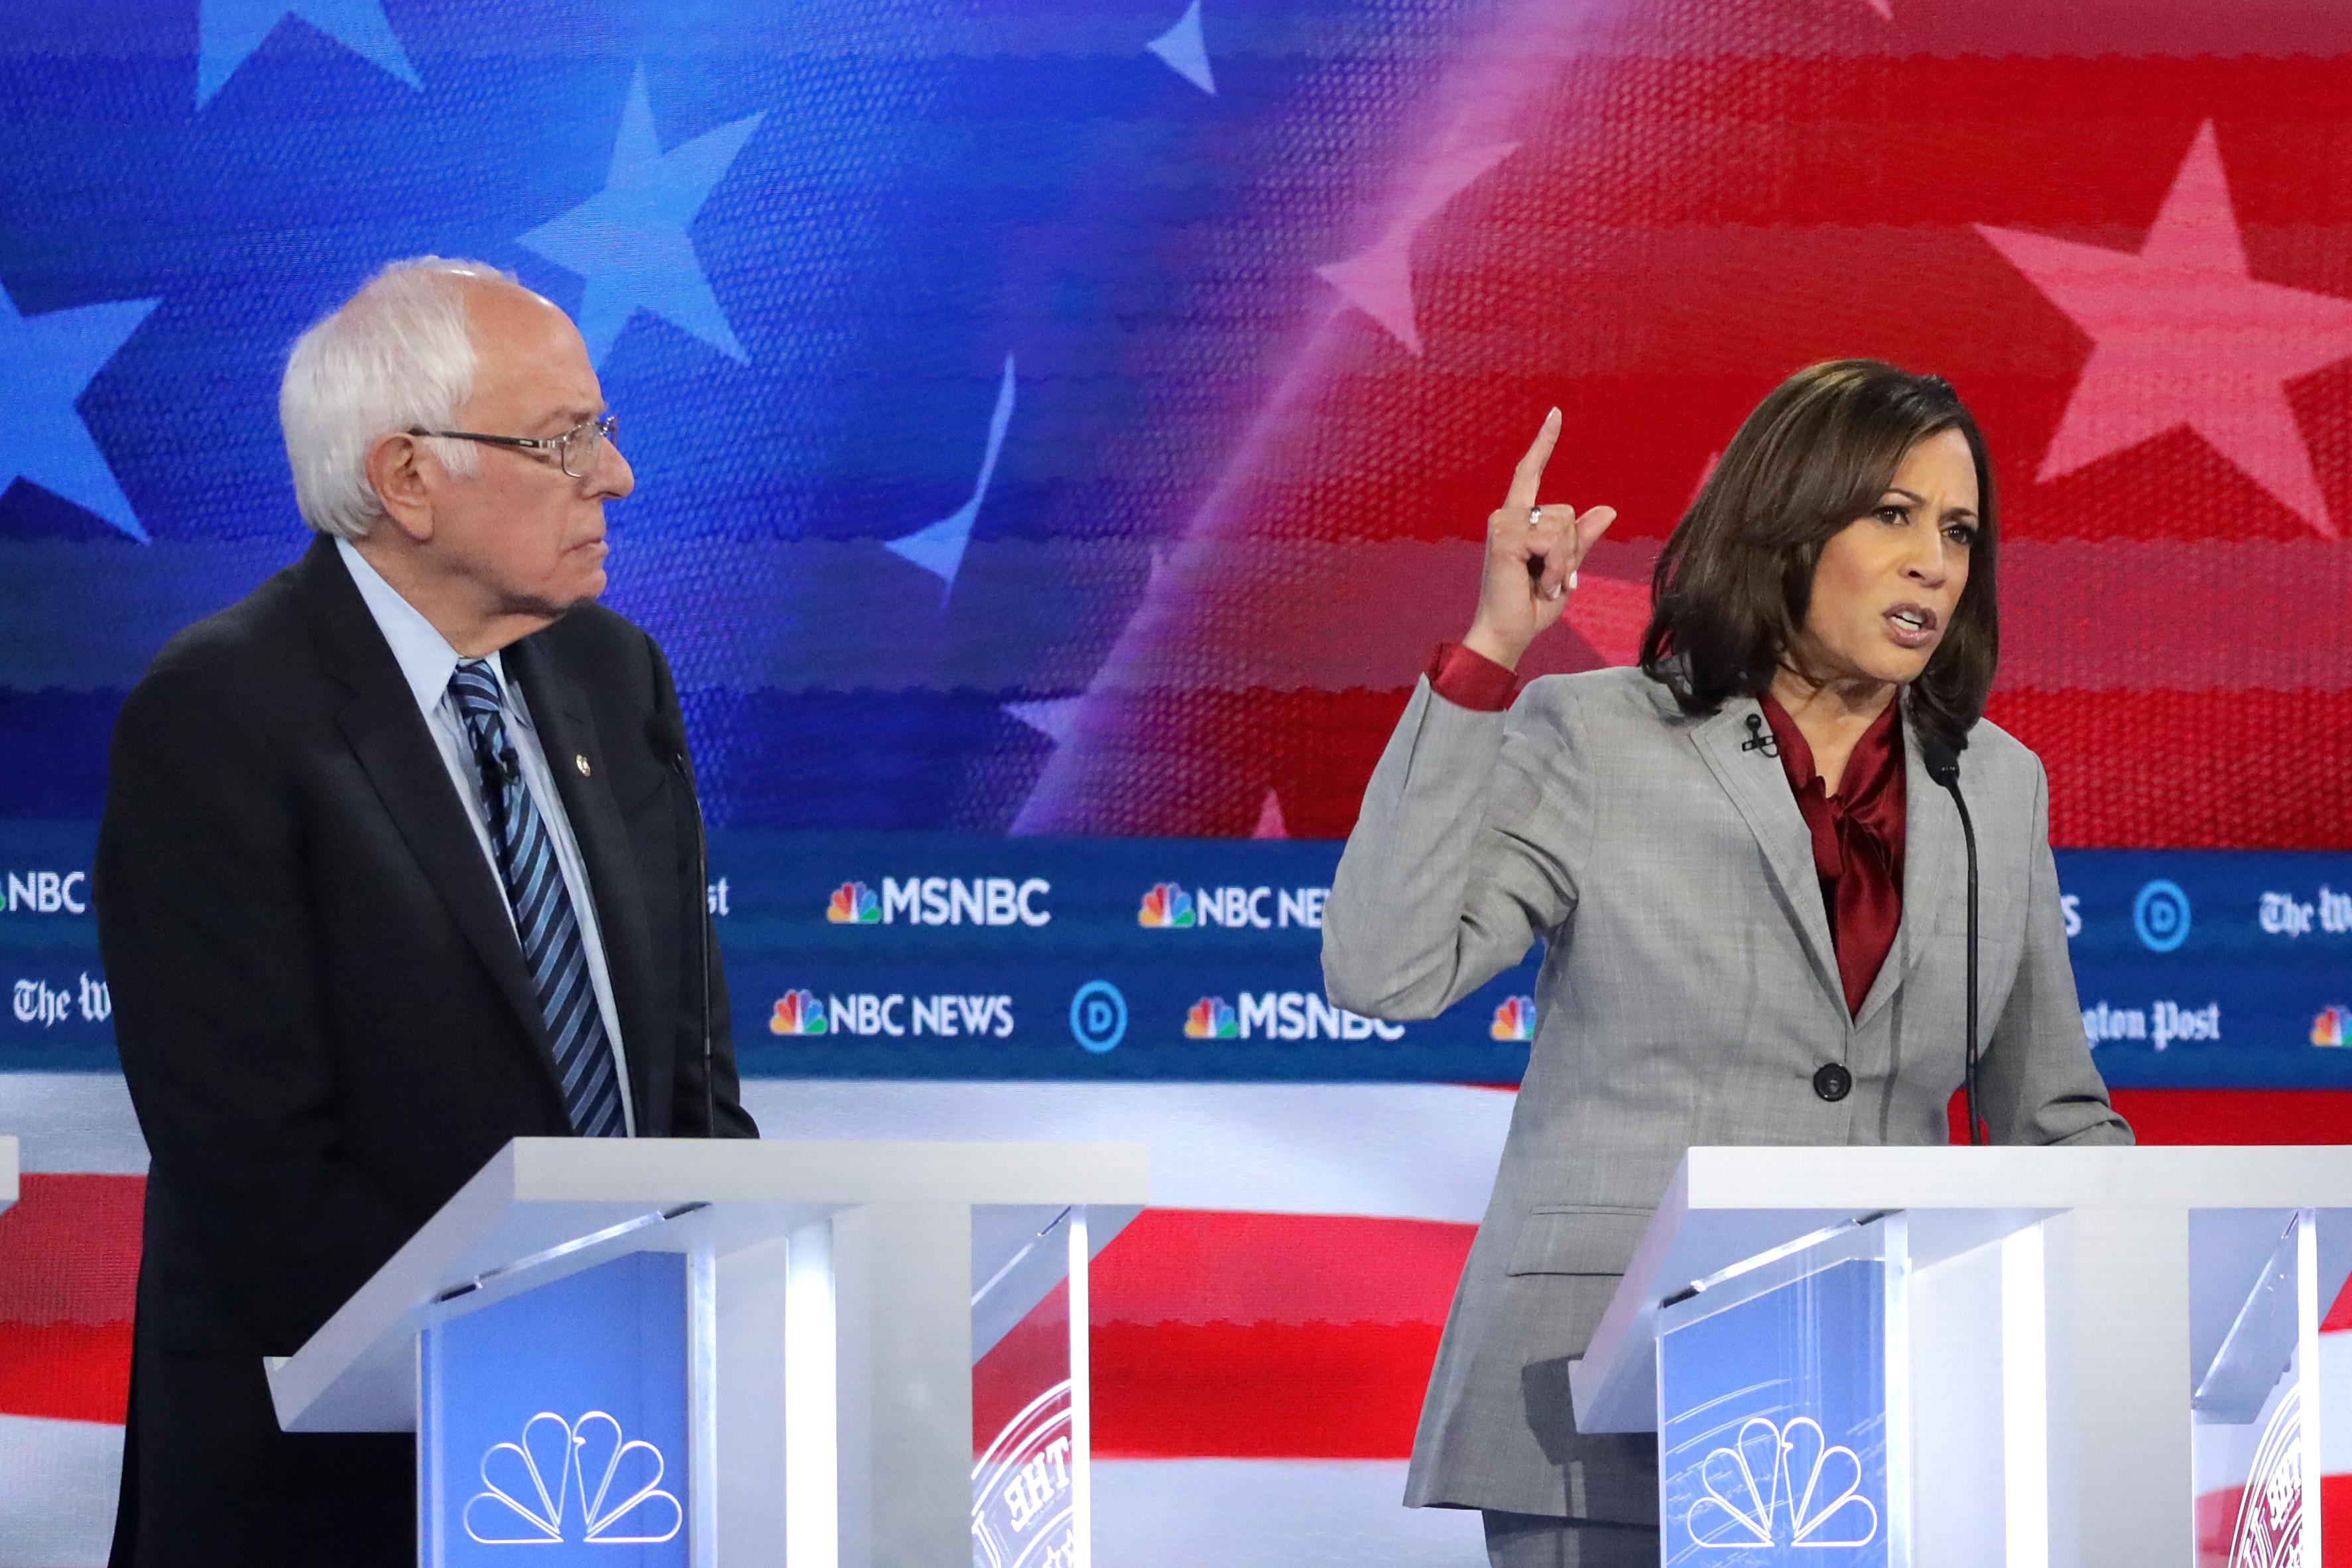 Sanders and Harris stand at lecterns in front of an American flag background.